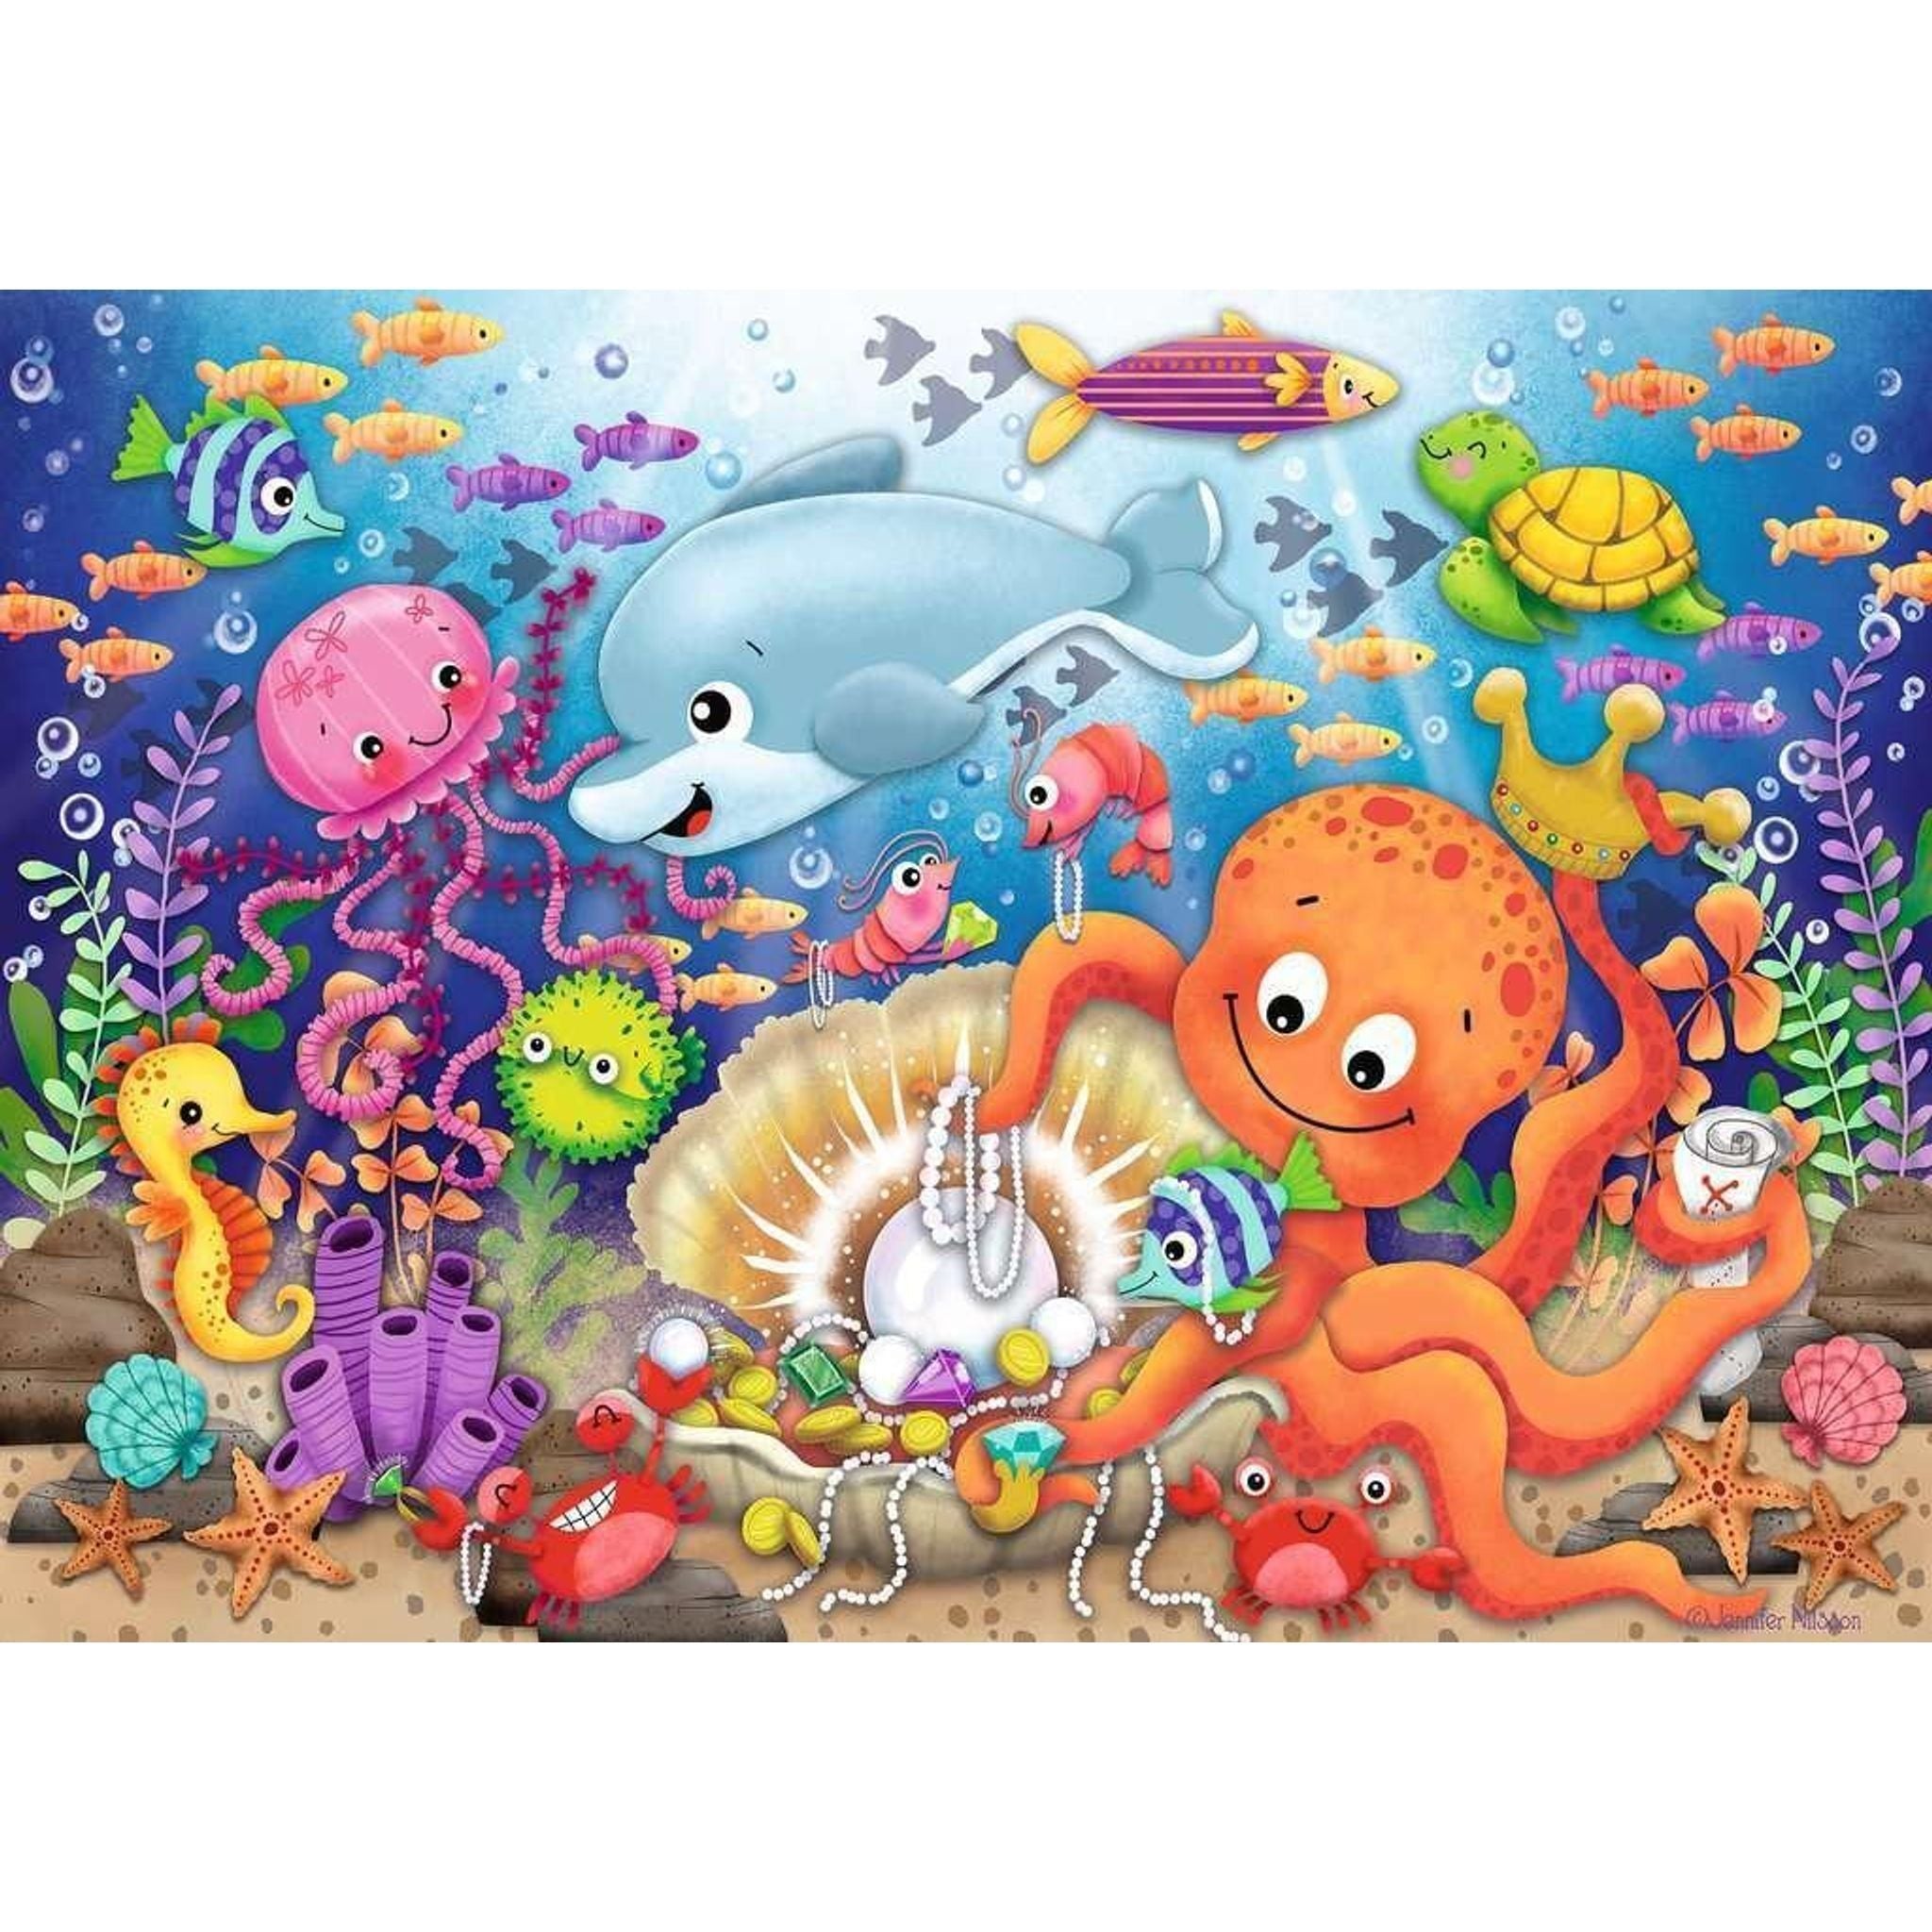 Ravensburger - Fishies Fortune 24 Piece Puzzle - Toybox Tales